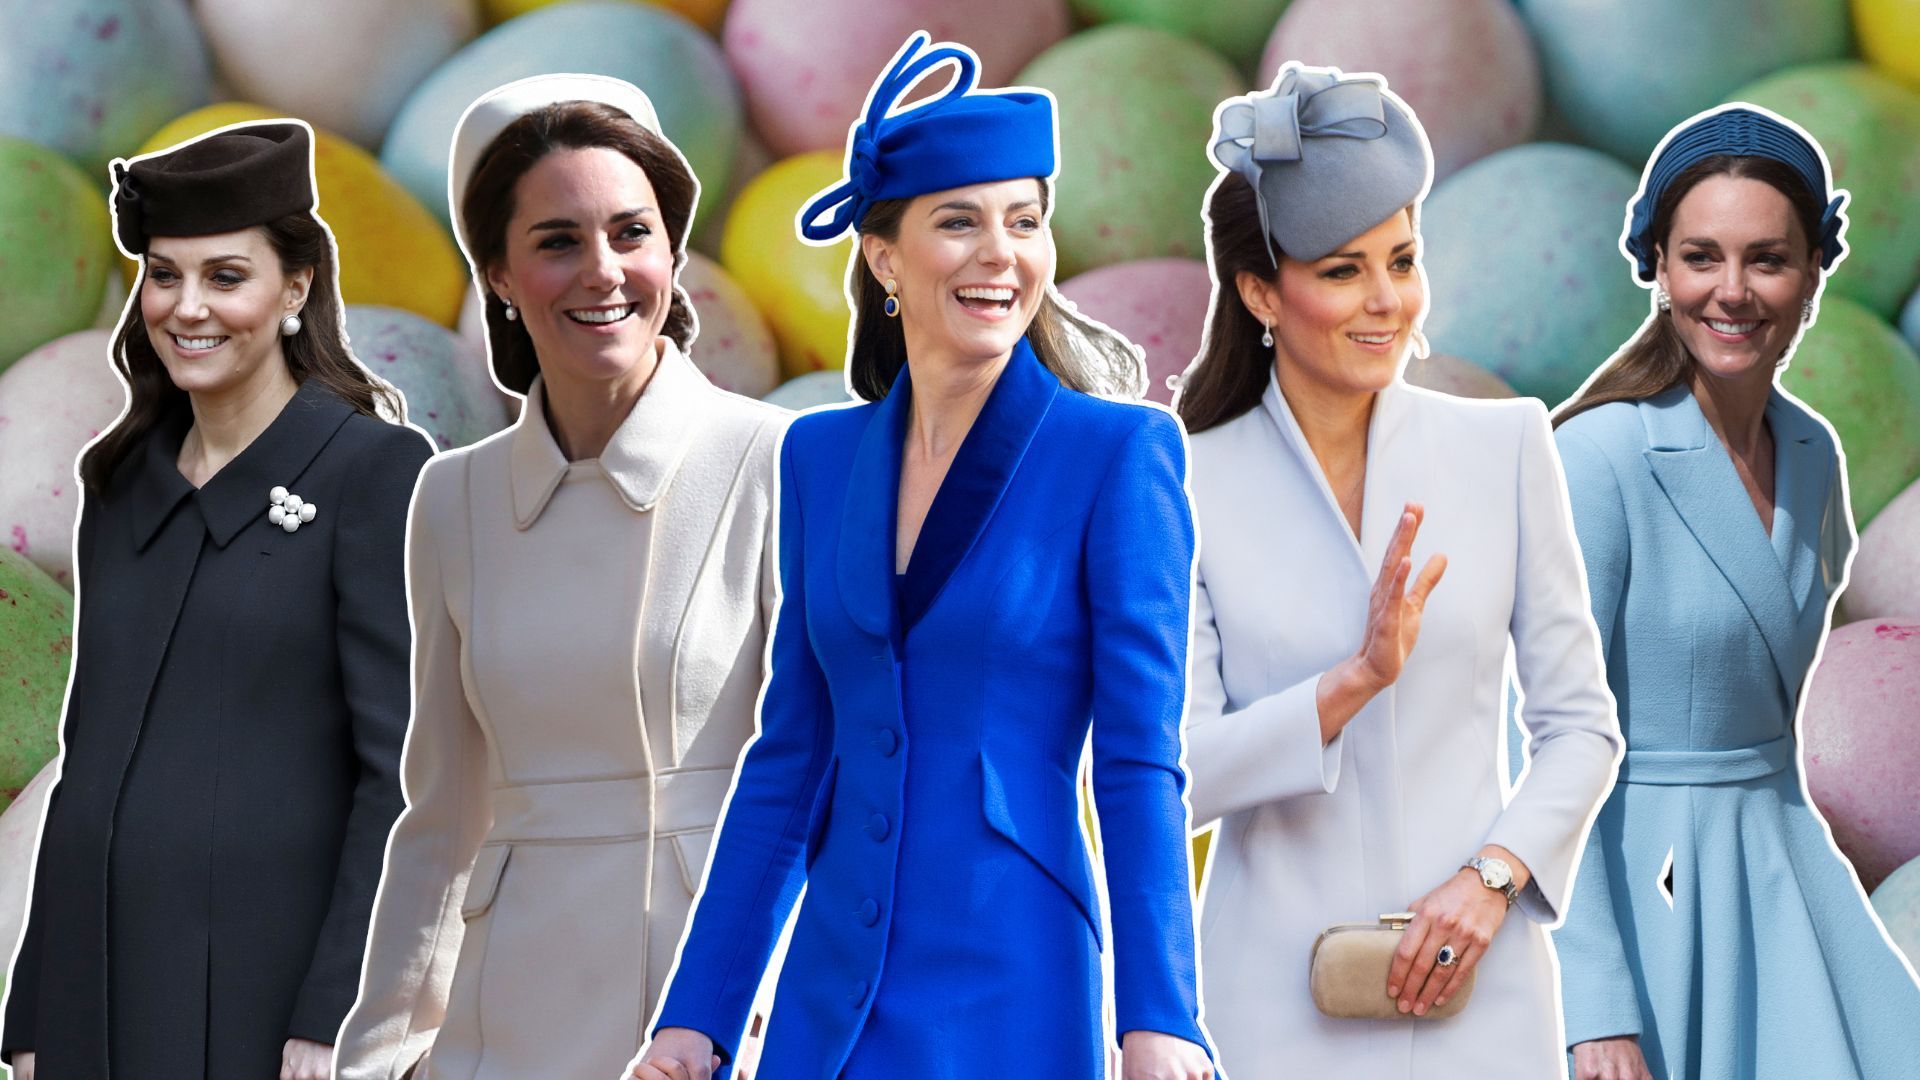 Every one of Princess Kate's elegant Easter Sunday outfits since becoming royal